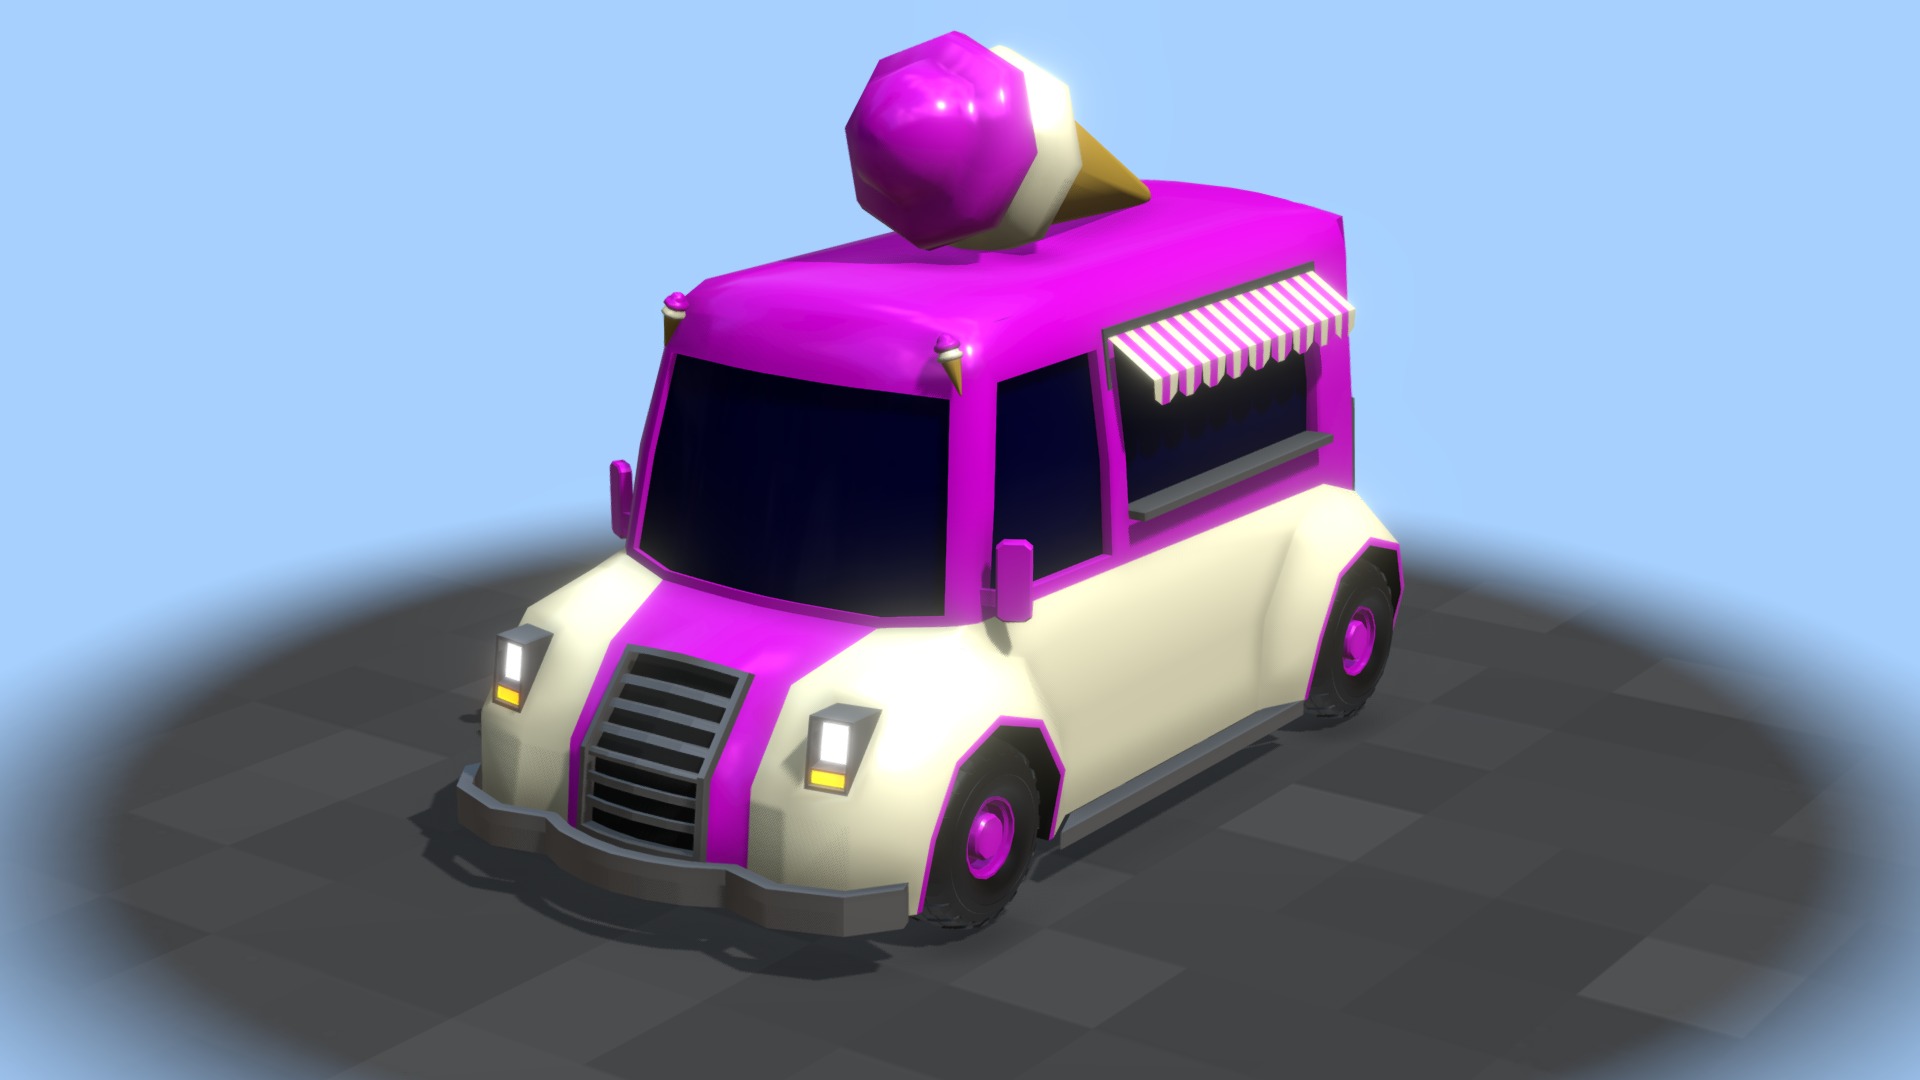 3D model Low Poly Ice-Cream Van - This is a 3D model of the Low Poly Ice-Cream Van. The 3D model is about a toy car with a pink ball on top.